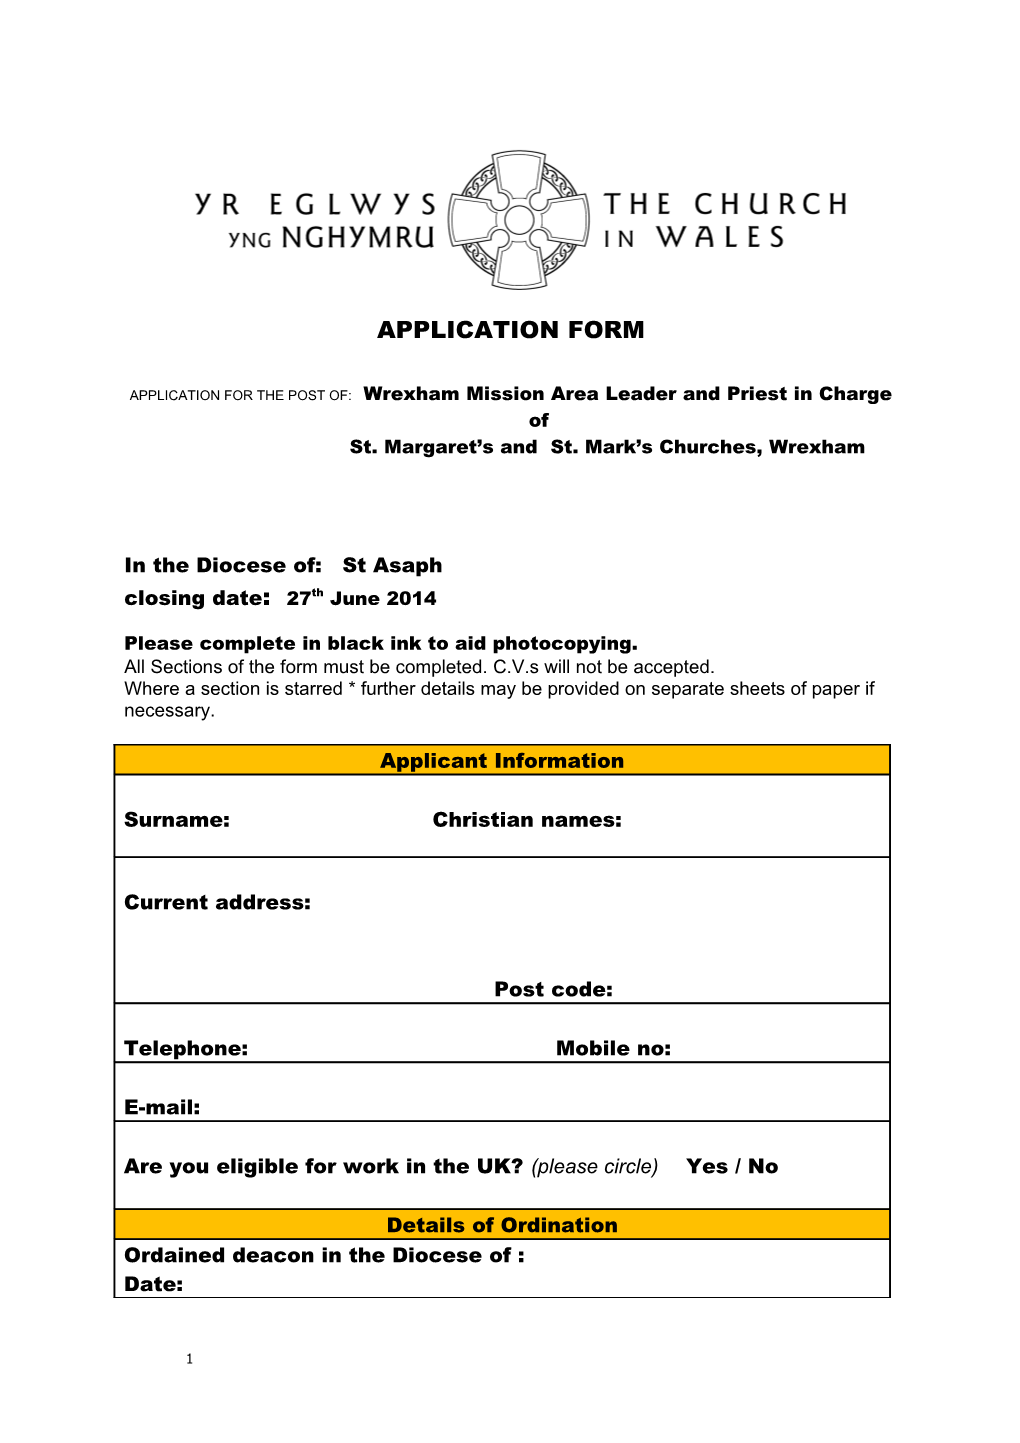 Application for the Post Of: Wrexham Mission Area Leader and Priest in Charge Of